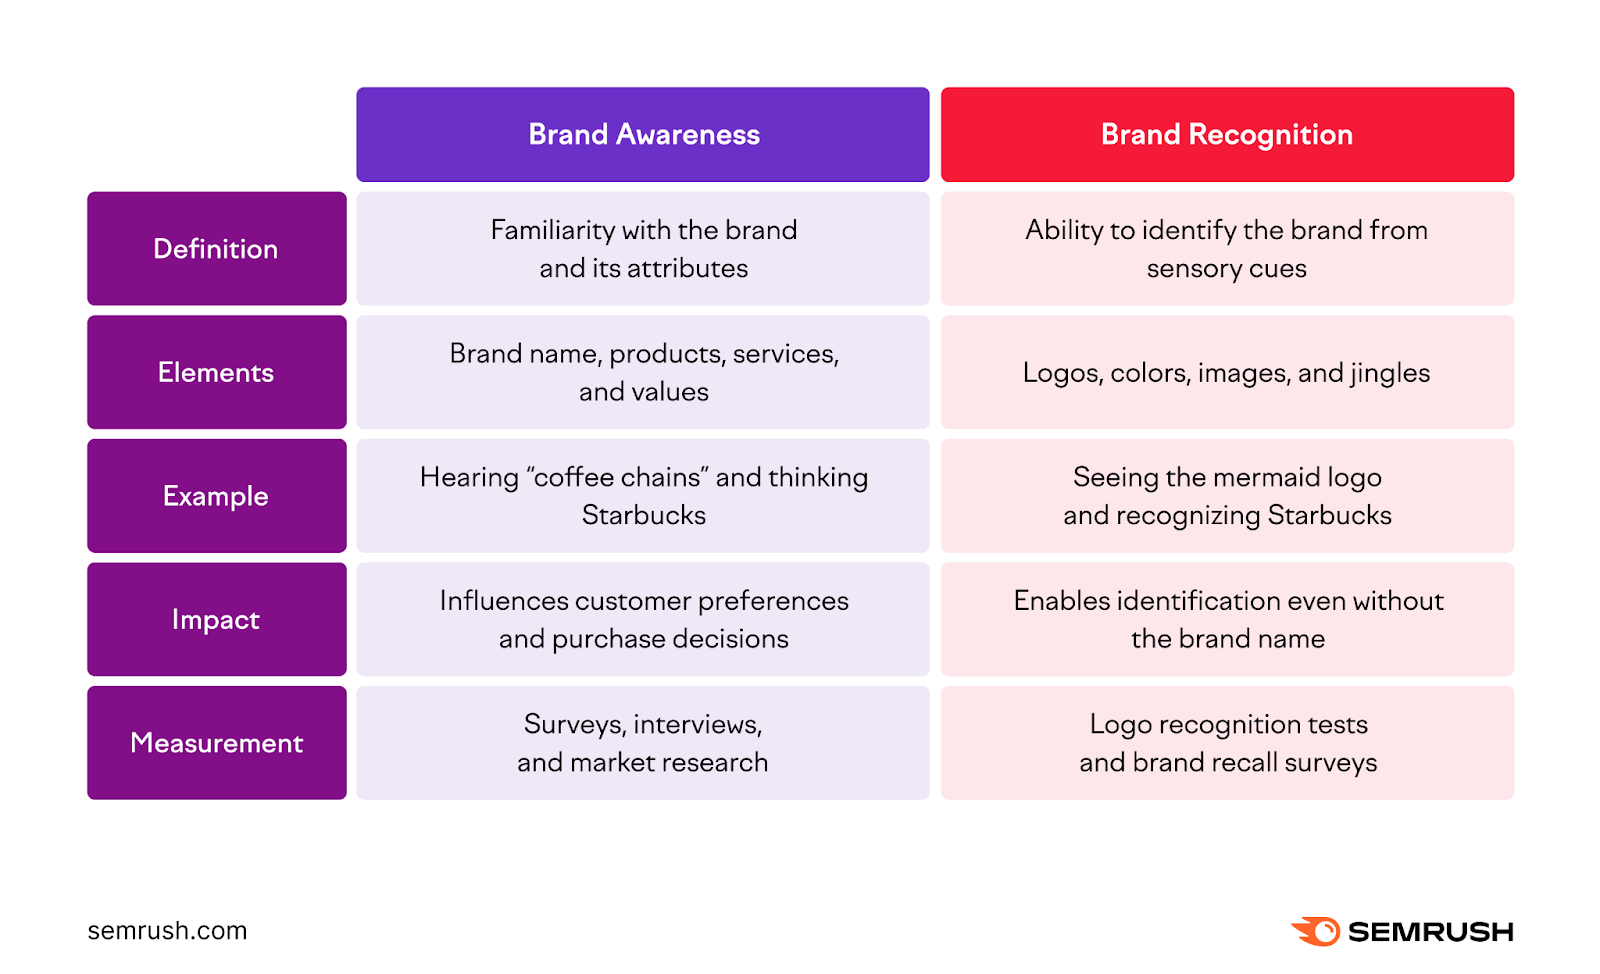 An infographic comparing "brand awareness" and "brand recognition"